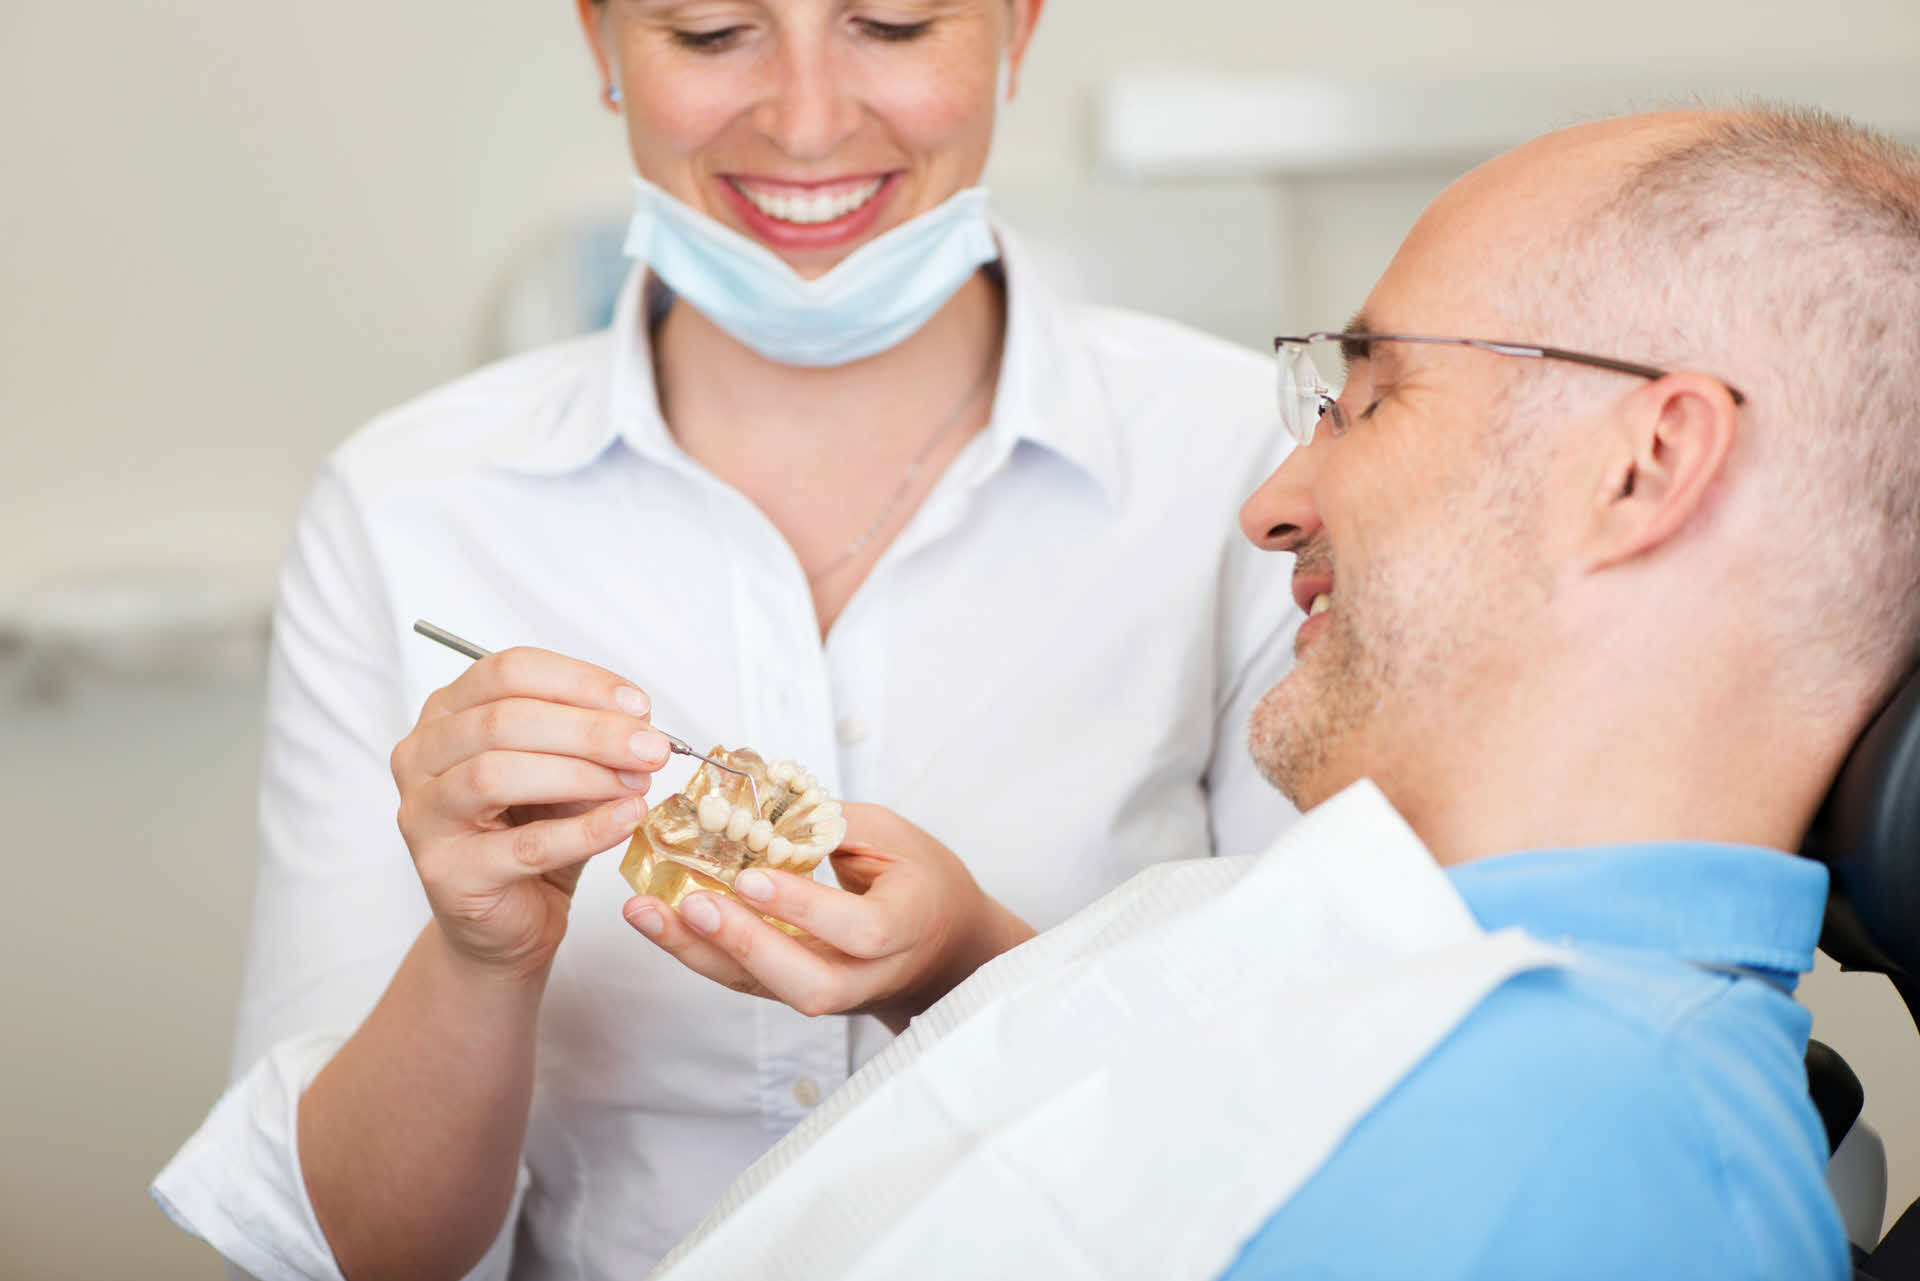 Our dentists have been helping Boise area residents with tooth pain, cavities, crowns, teeth whitening, Invisalign, and more for over 40 years.